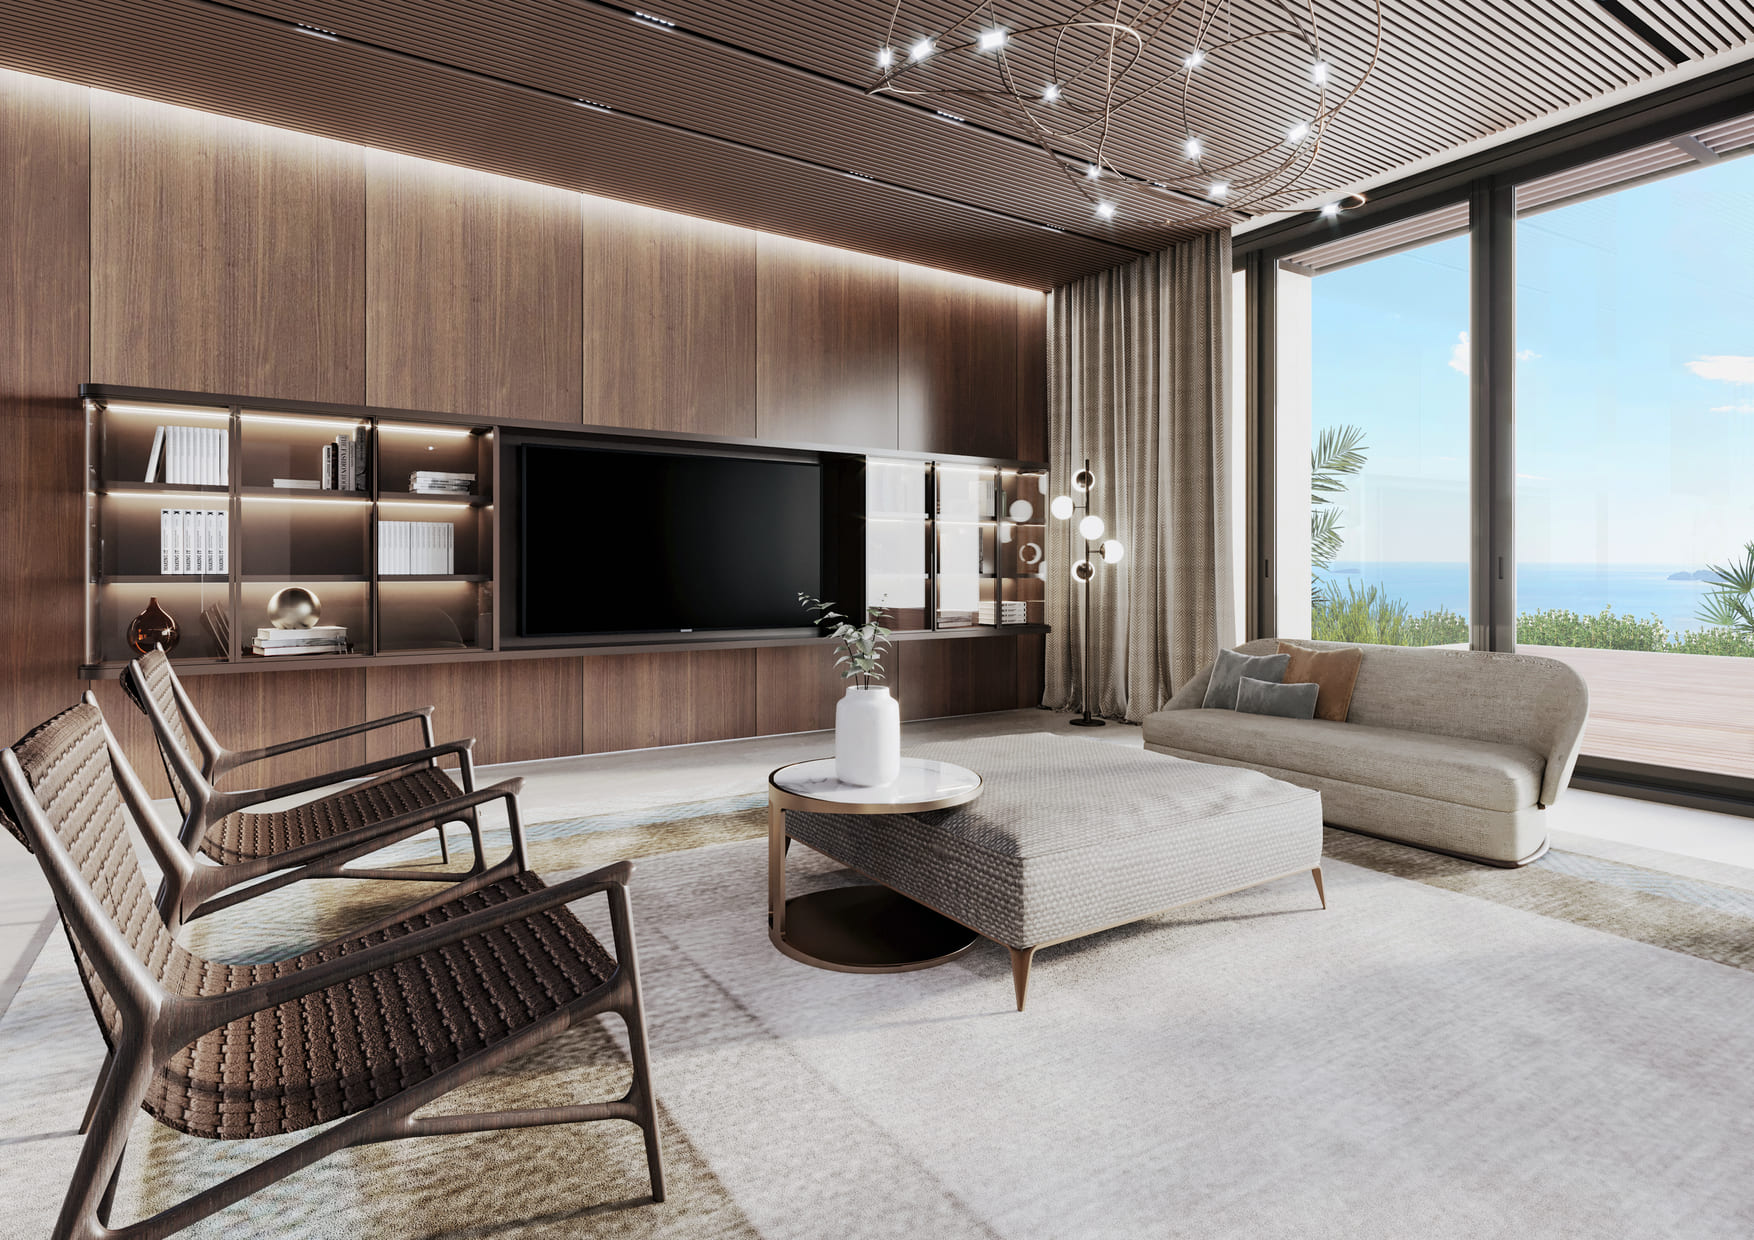 A modern living area with wooden wall panels, a large TV, comfortable seating, and a seaside view through expansive windows.